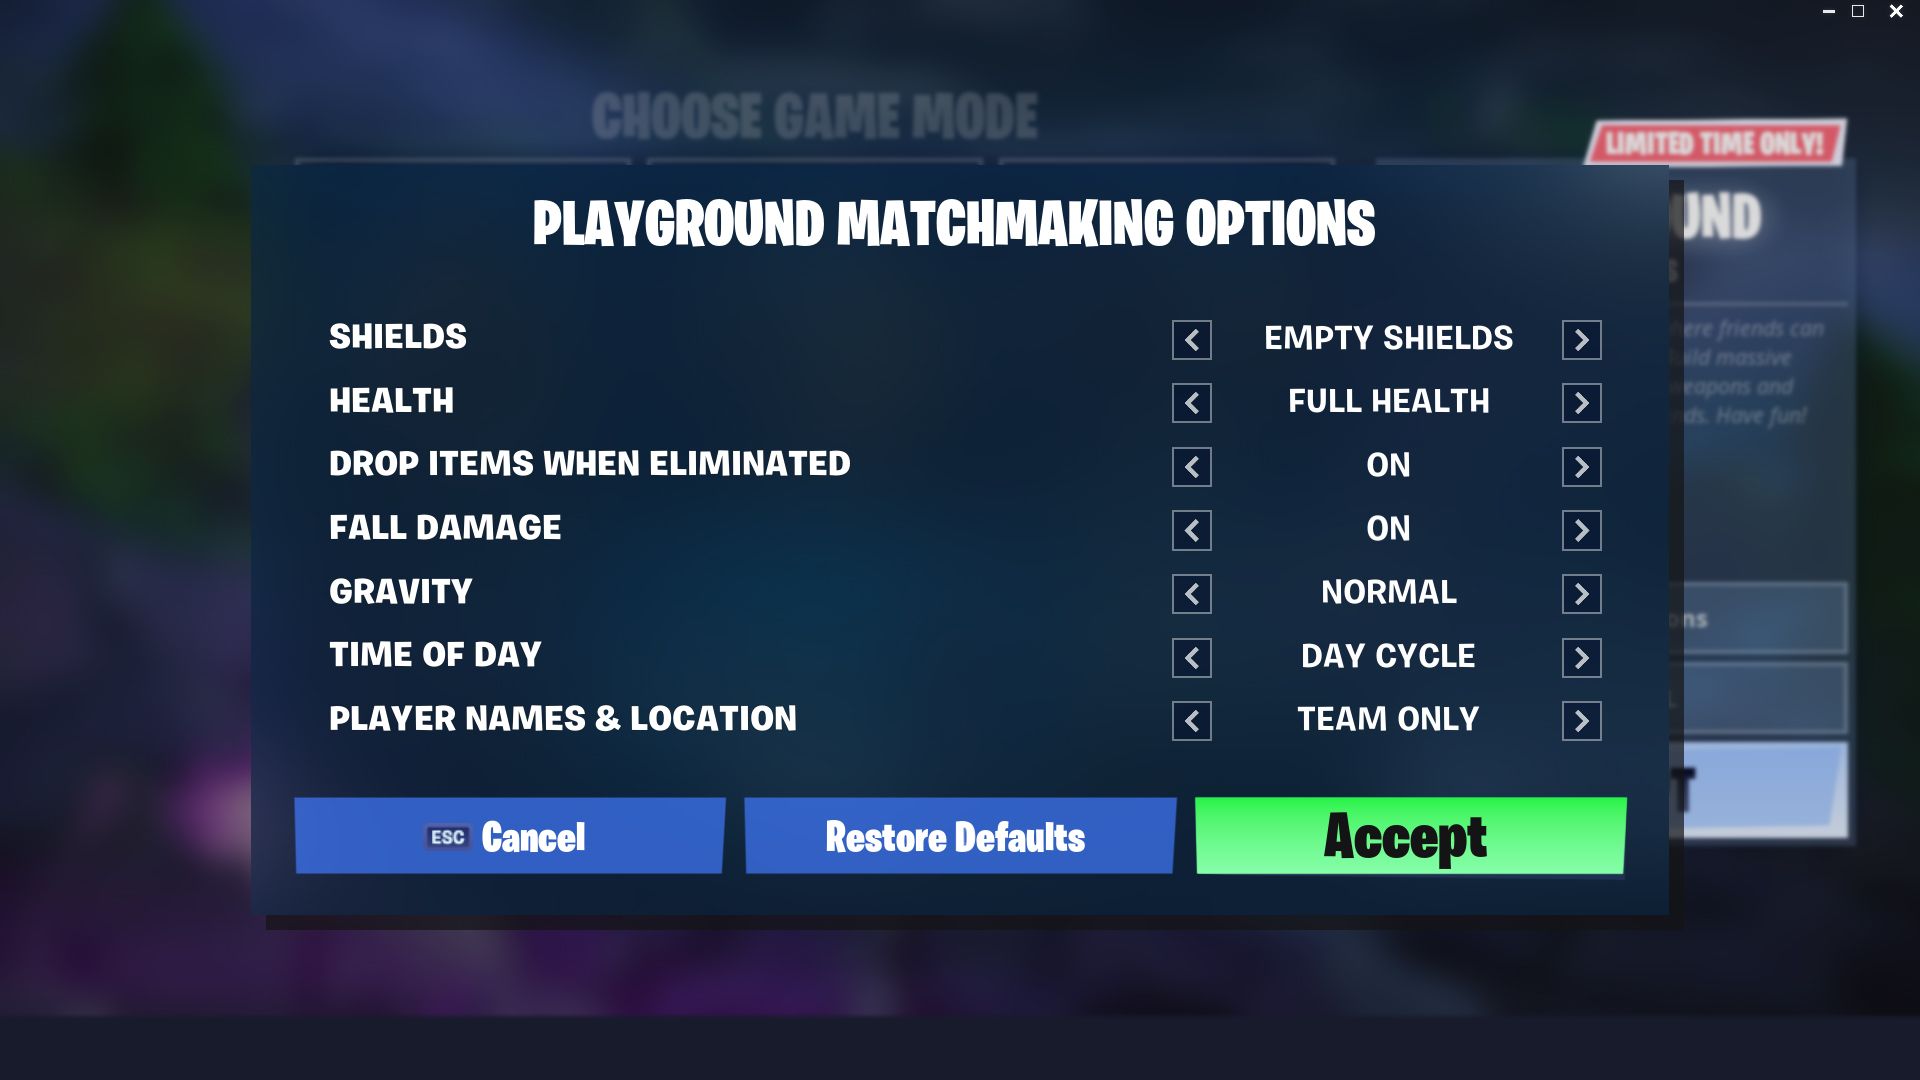 Custom Playground options - Health, Gravity, Fall Damage and more